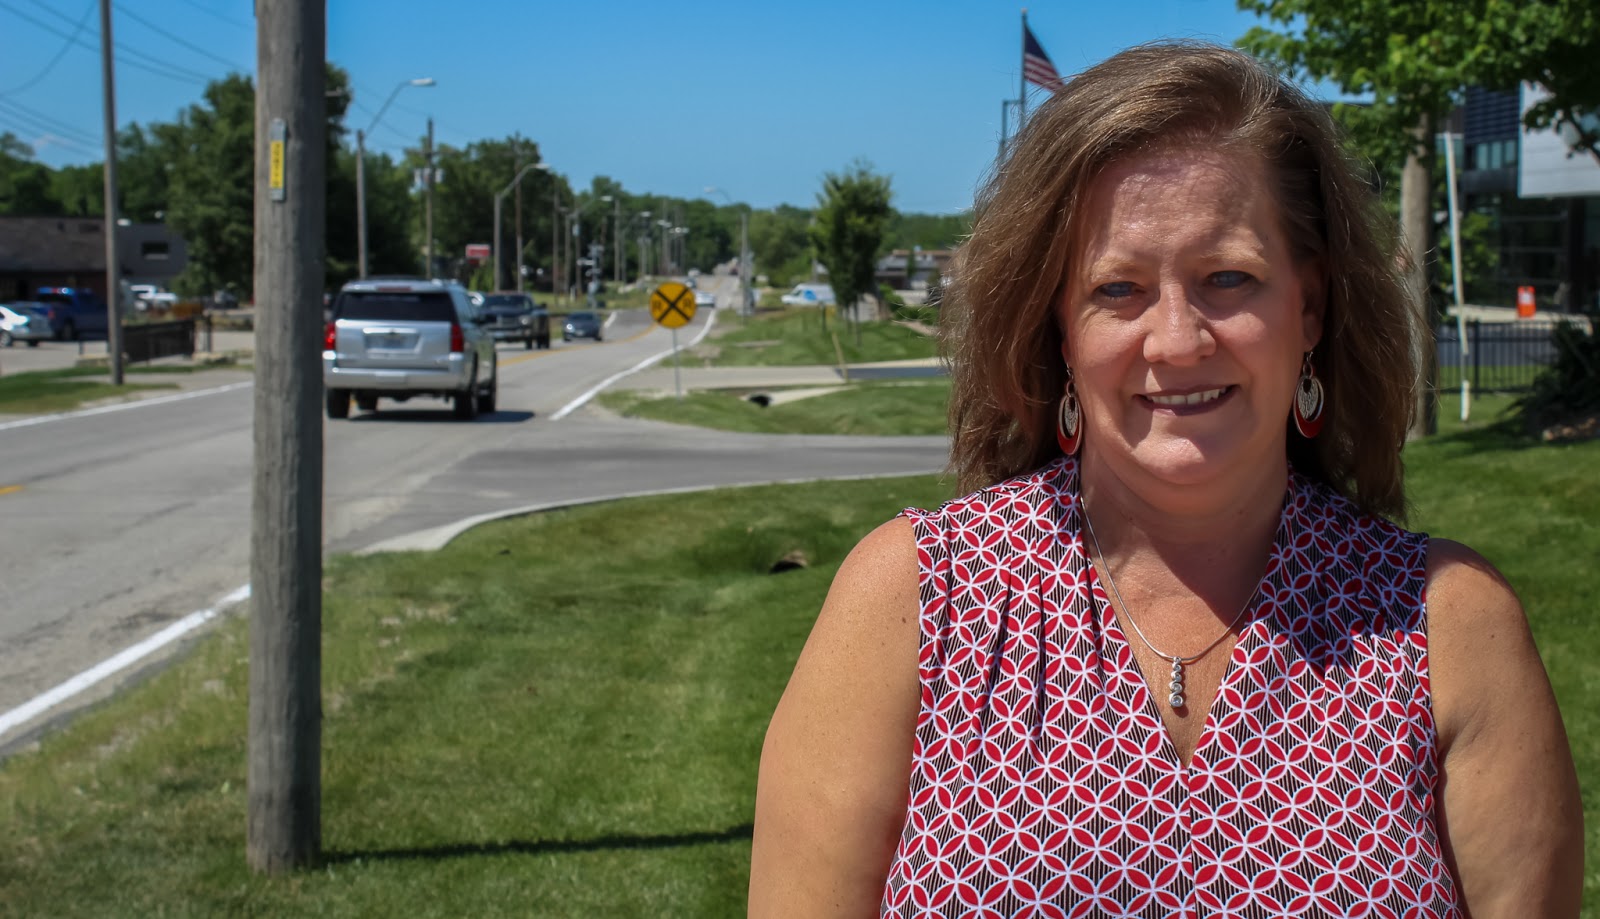 MCCID District Manager Vickie Wolgast is working to help win approval for Holmes Road construction from KCMO.